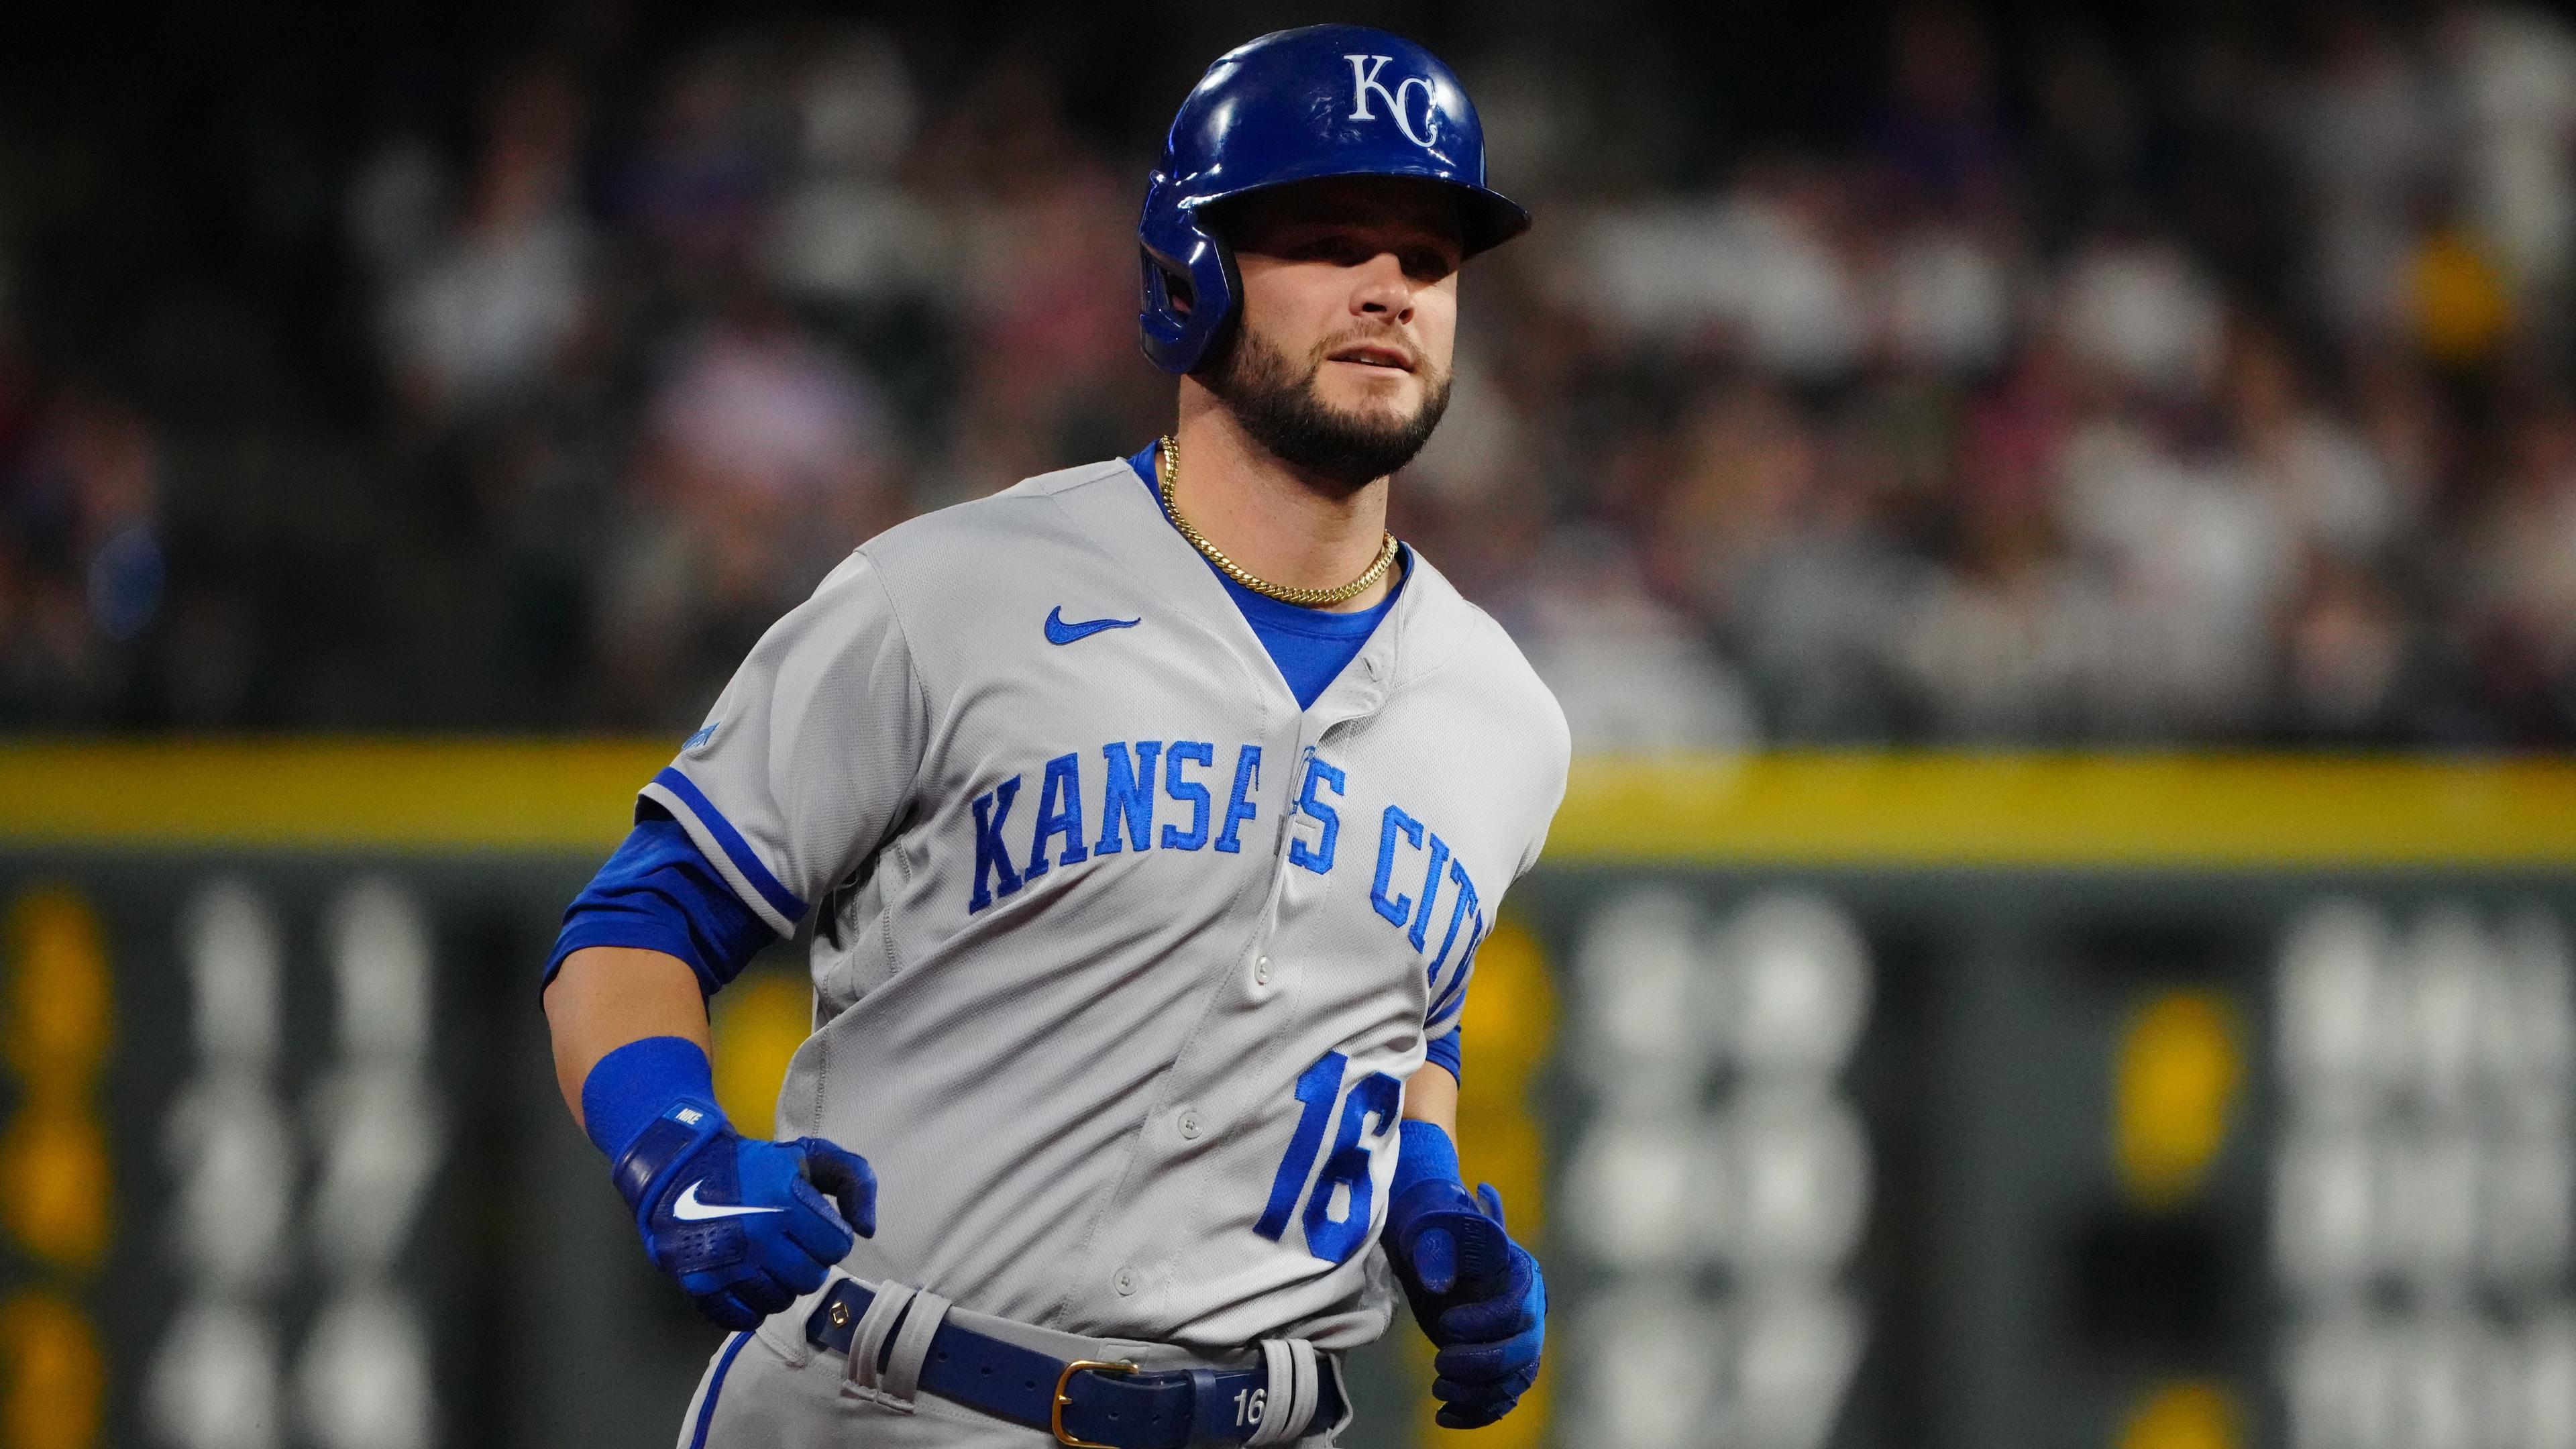 Kansas City Royals left fielder Andrew Benintendi (16) RBI triples in the seventh inning against the Colorado Rockies at Coors Field. / Ron Chenoy-USA TODAY Sports